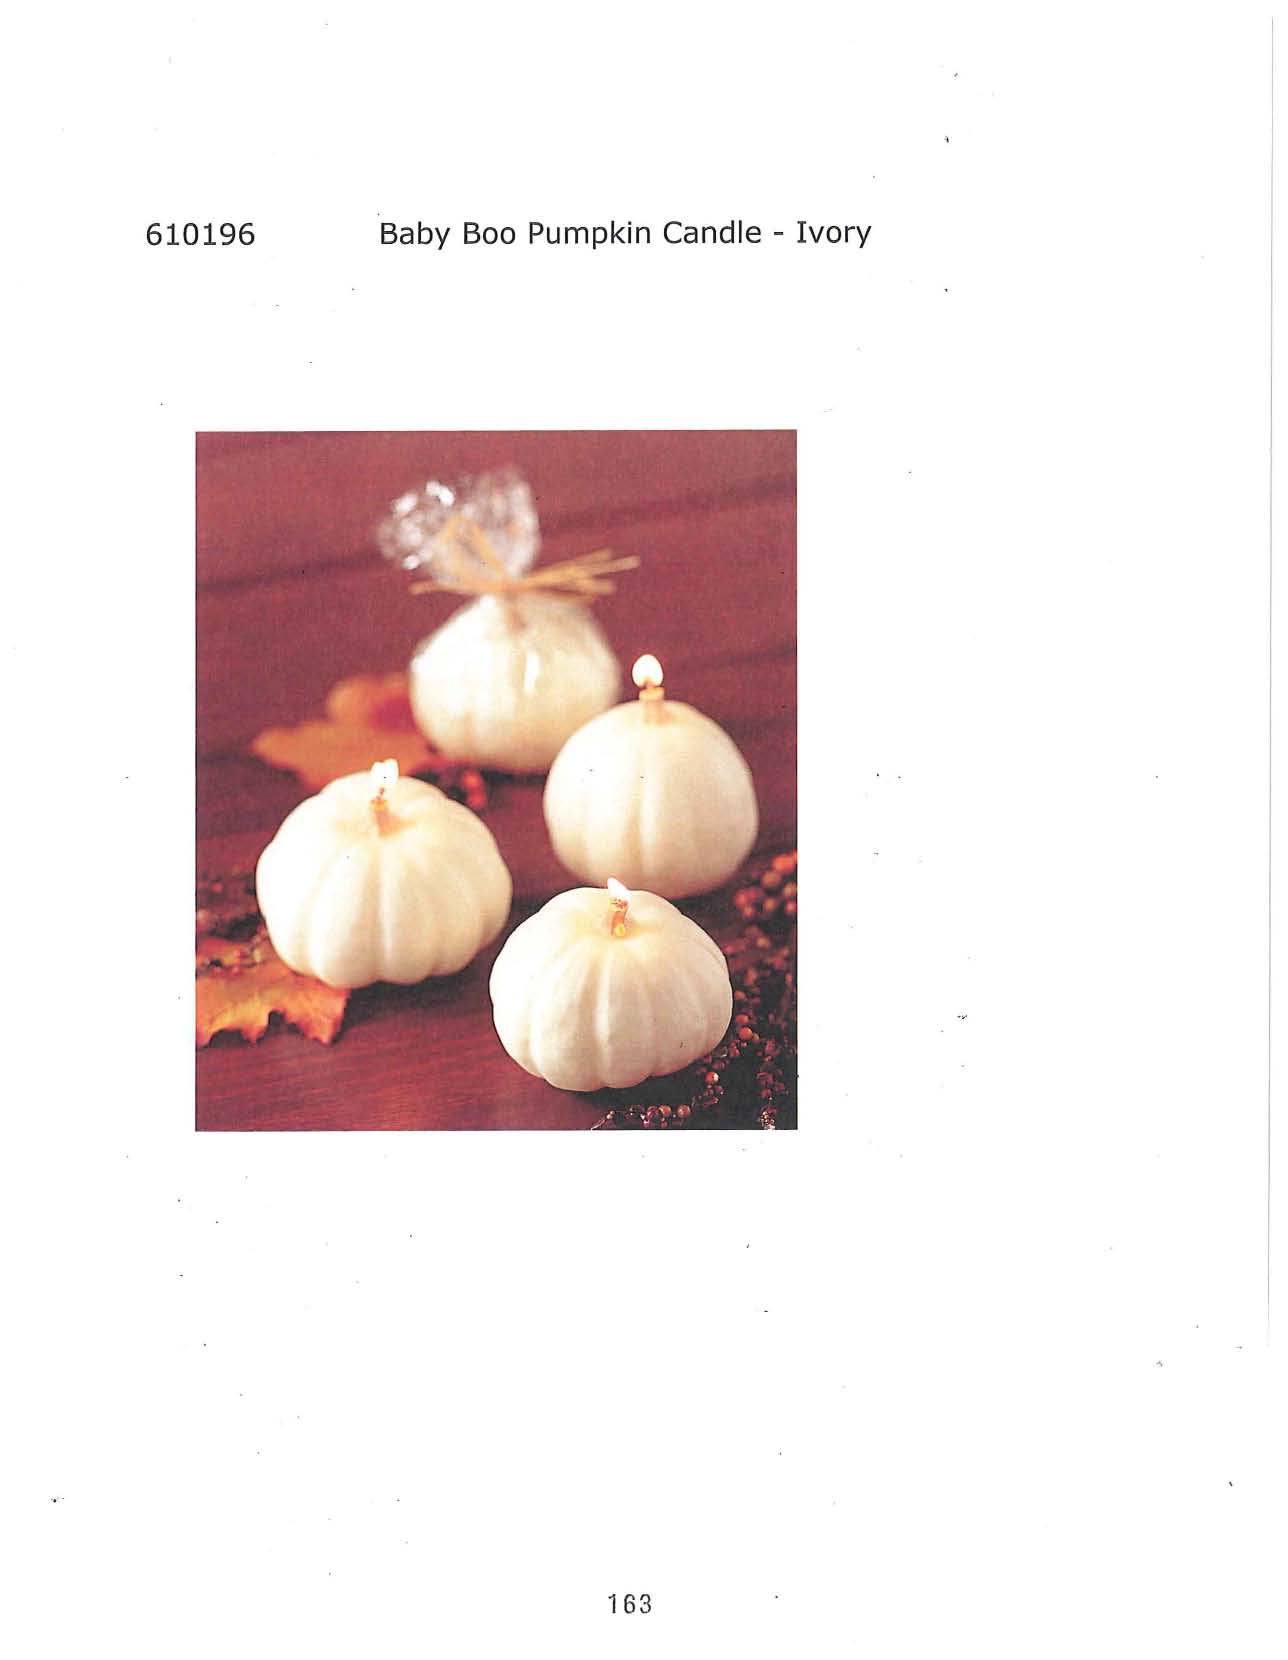 Baby Boo Pumpkin Candle - Ivory